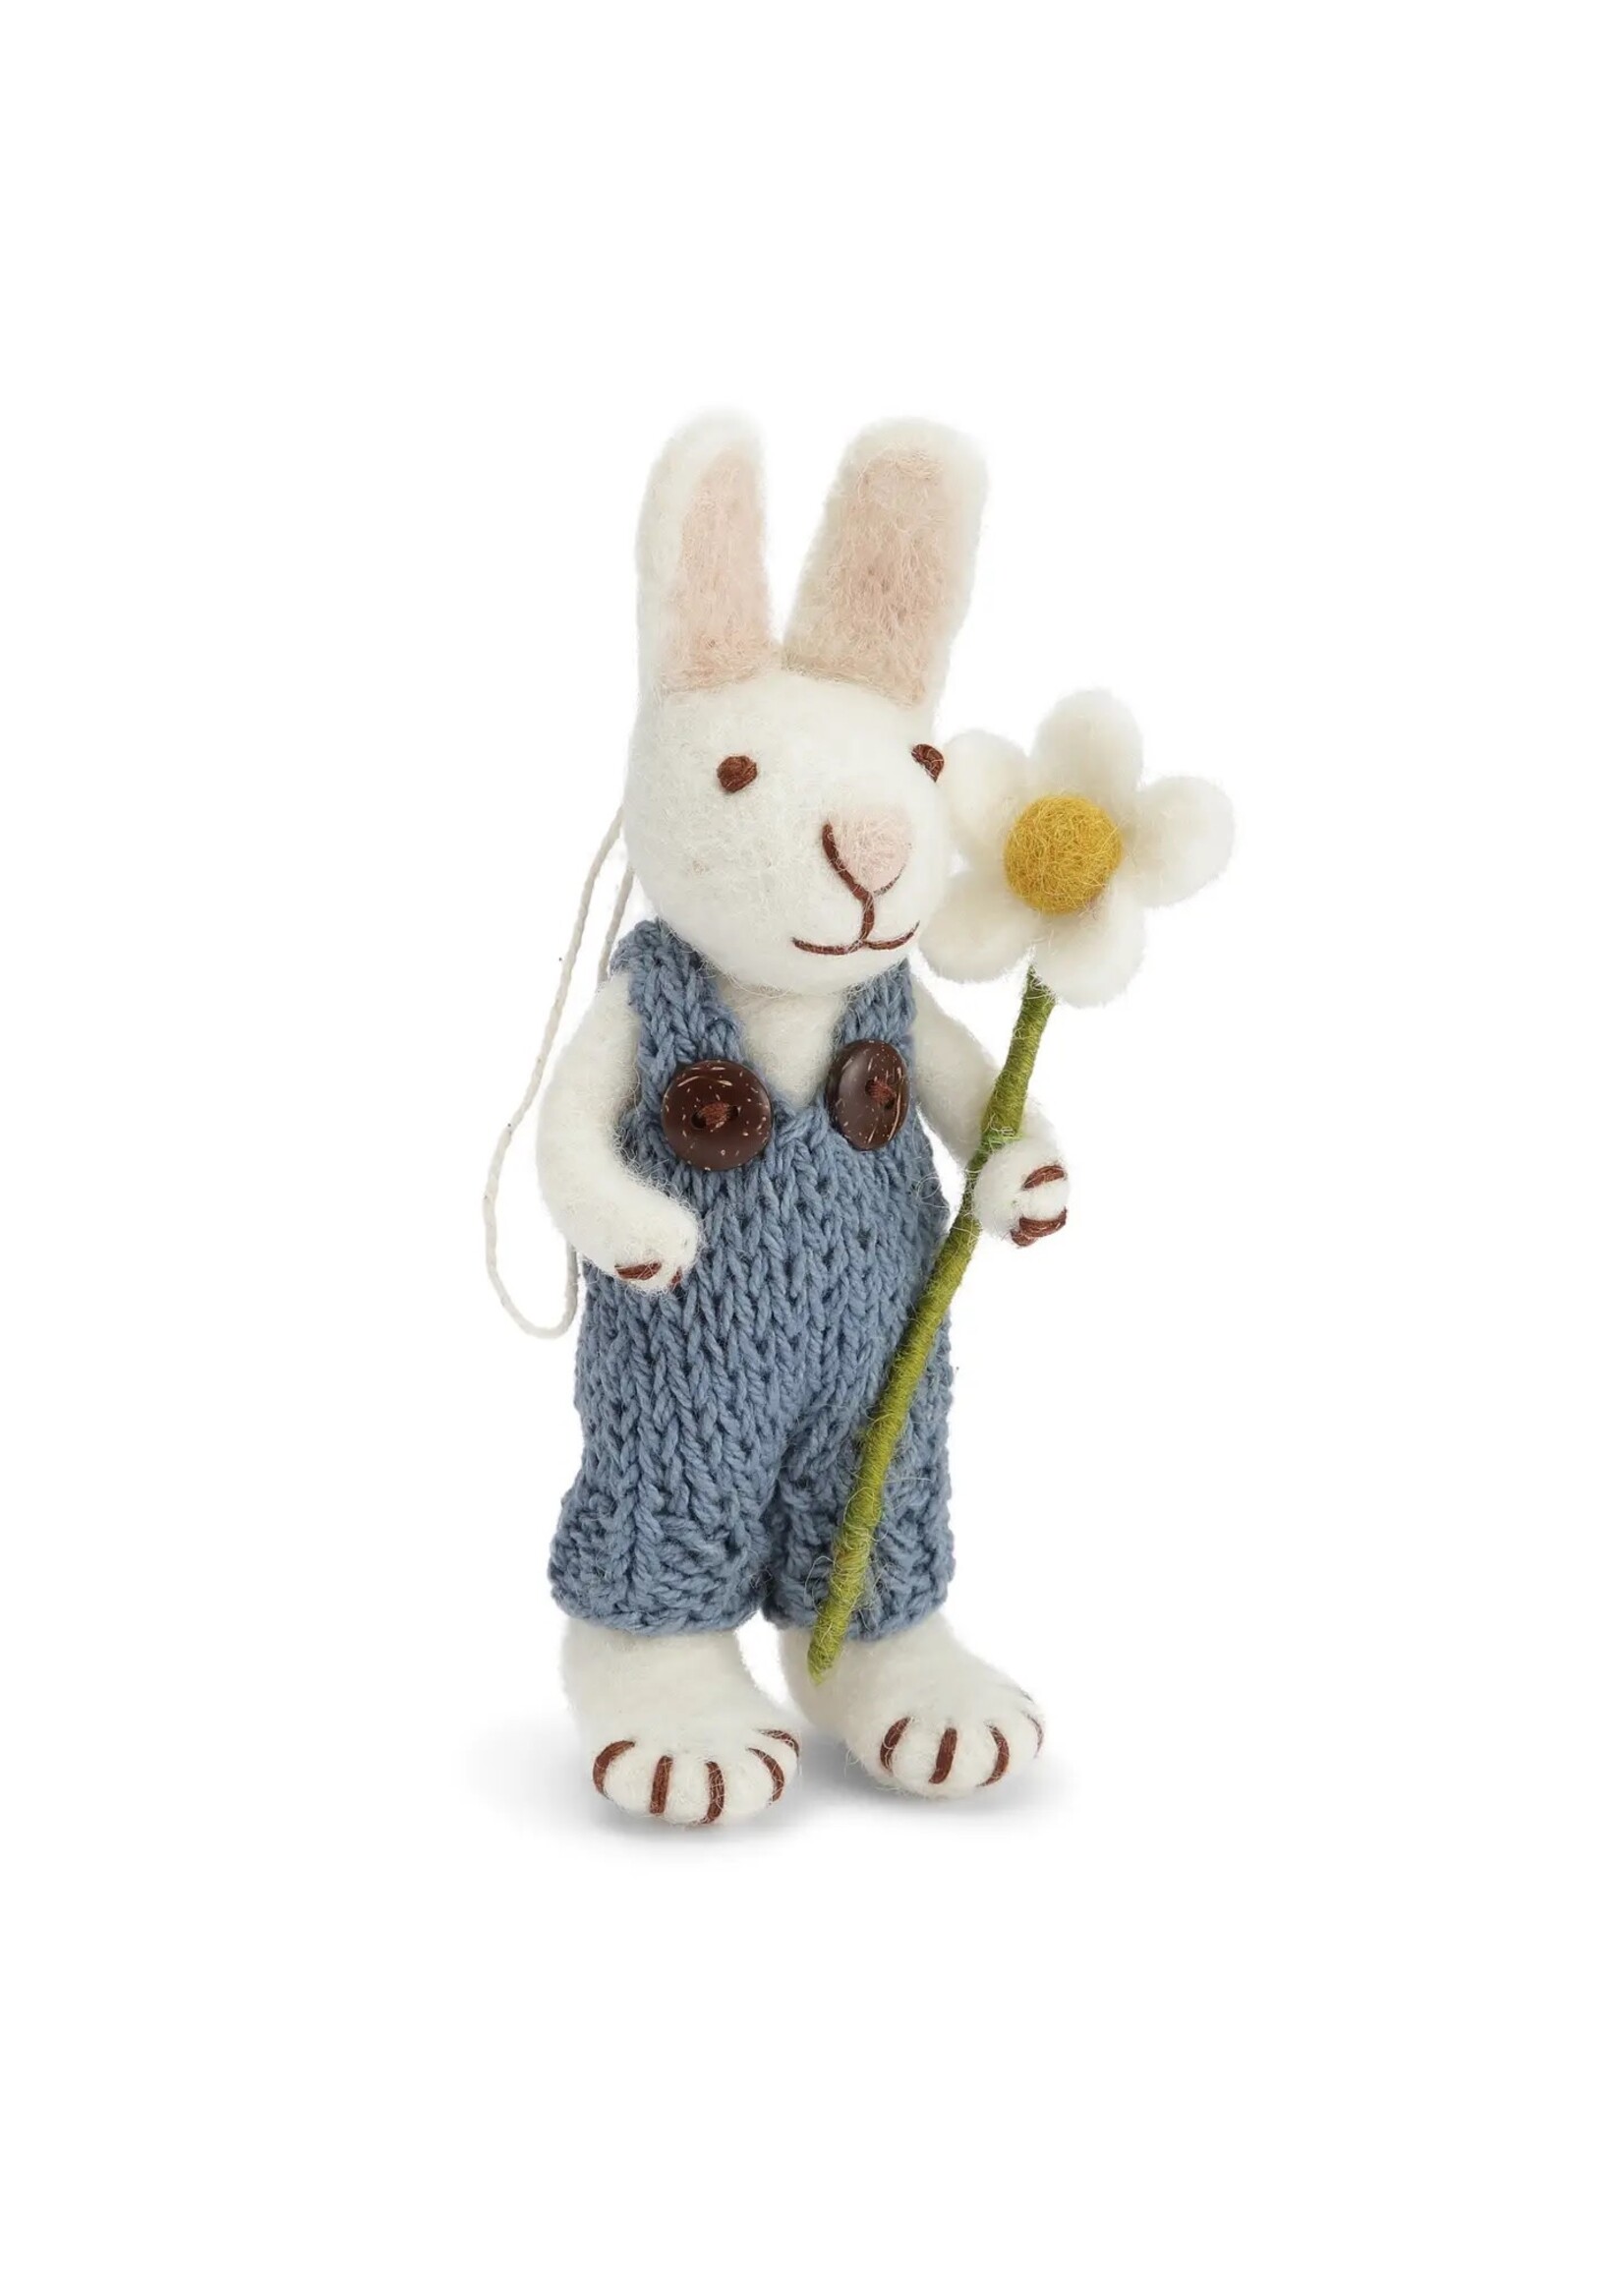 Bunny White with Blue Pants & Marguerite - Small